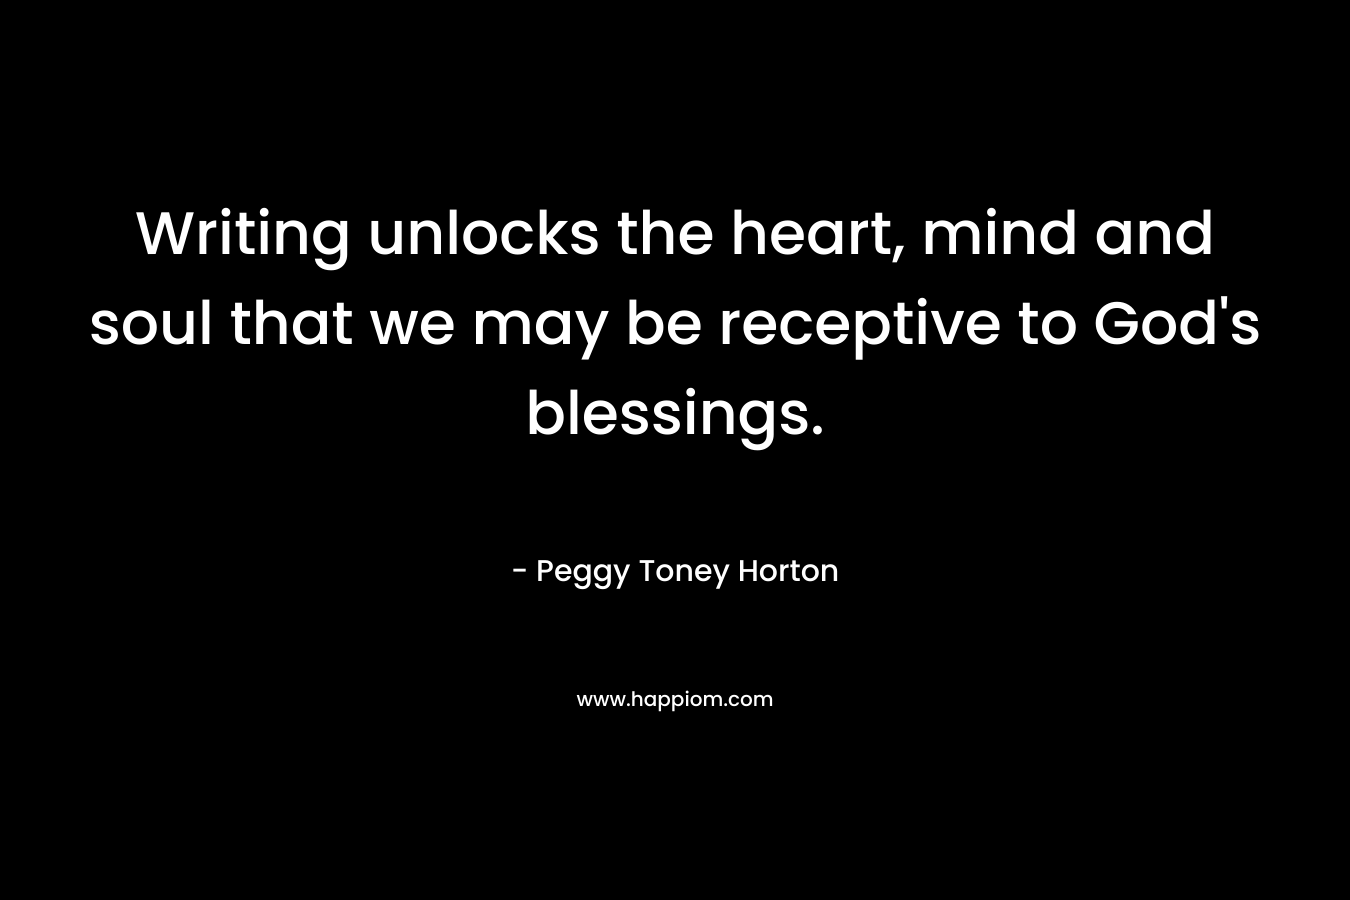 Writing unlocks the heart, mind and soul that we may be receptive to God's blessings.